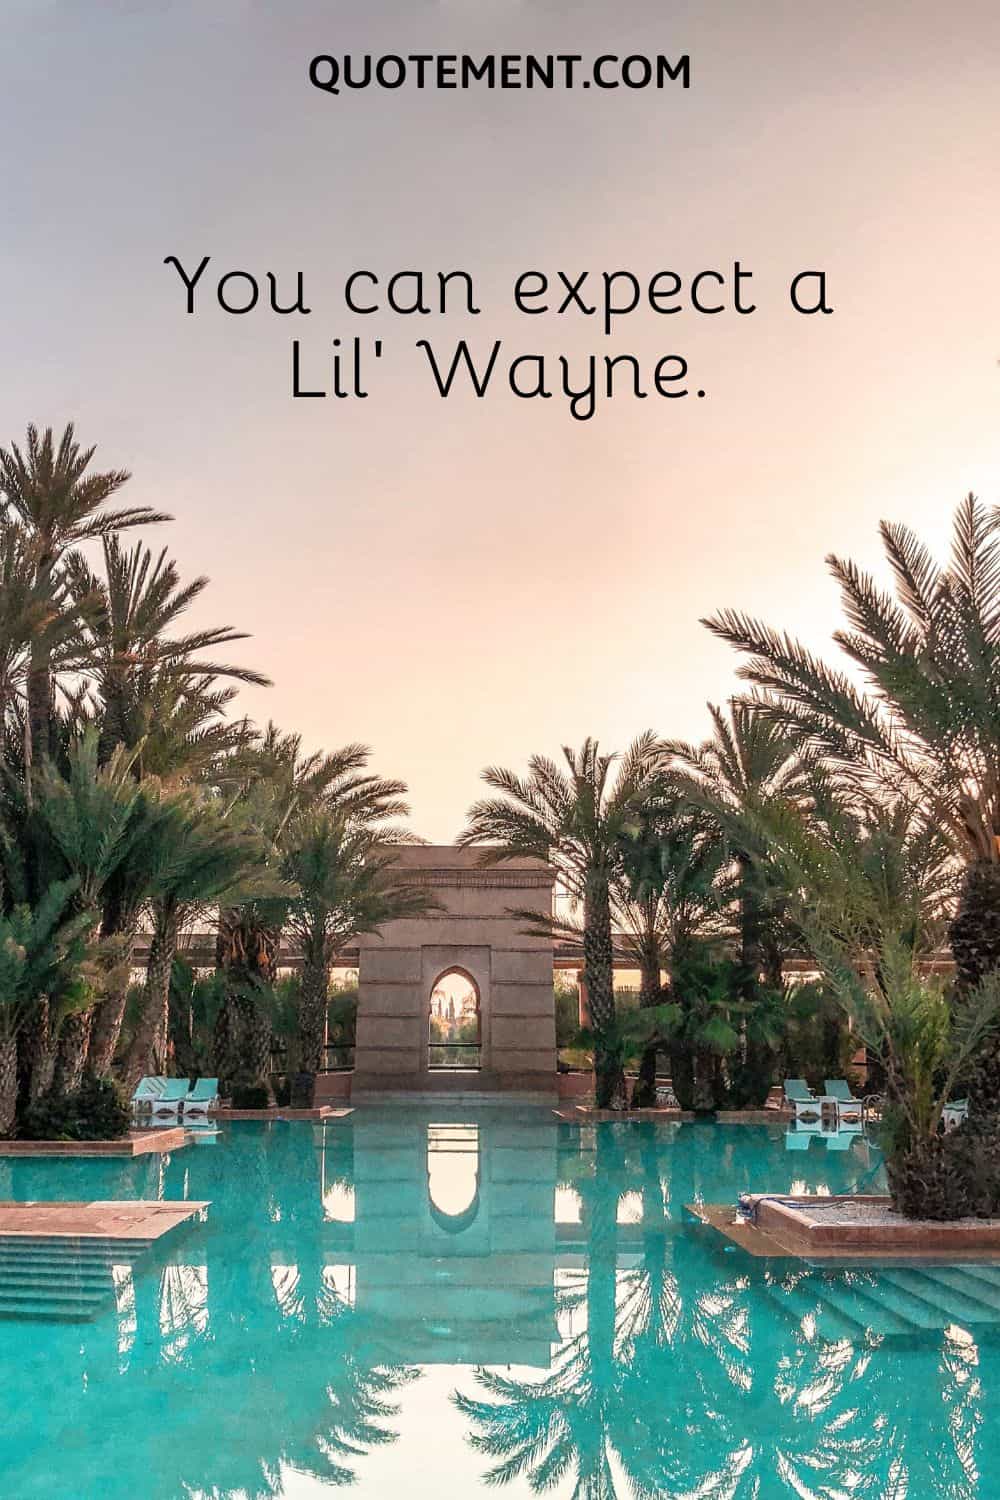 You can expect a Lil’ Wayne.